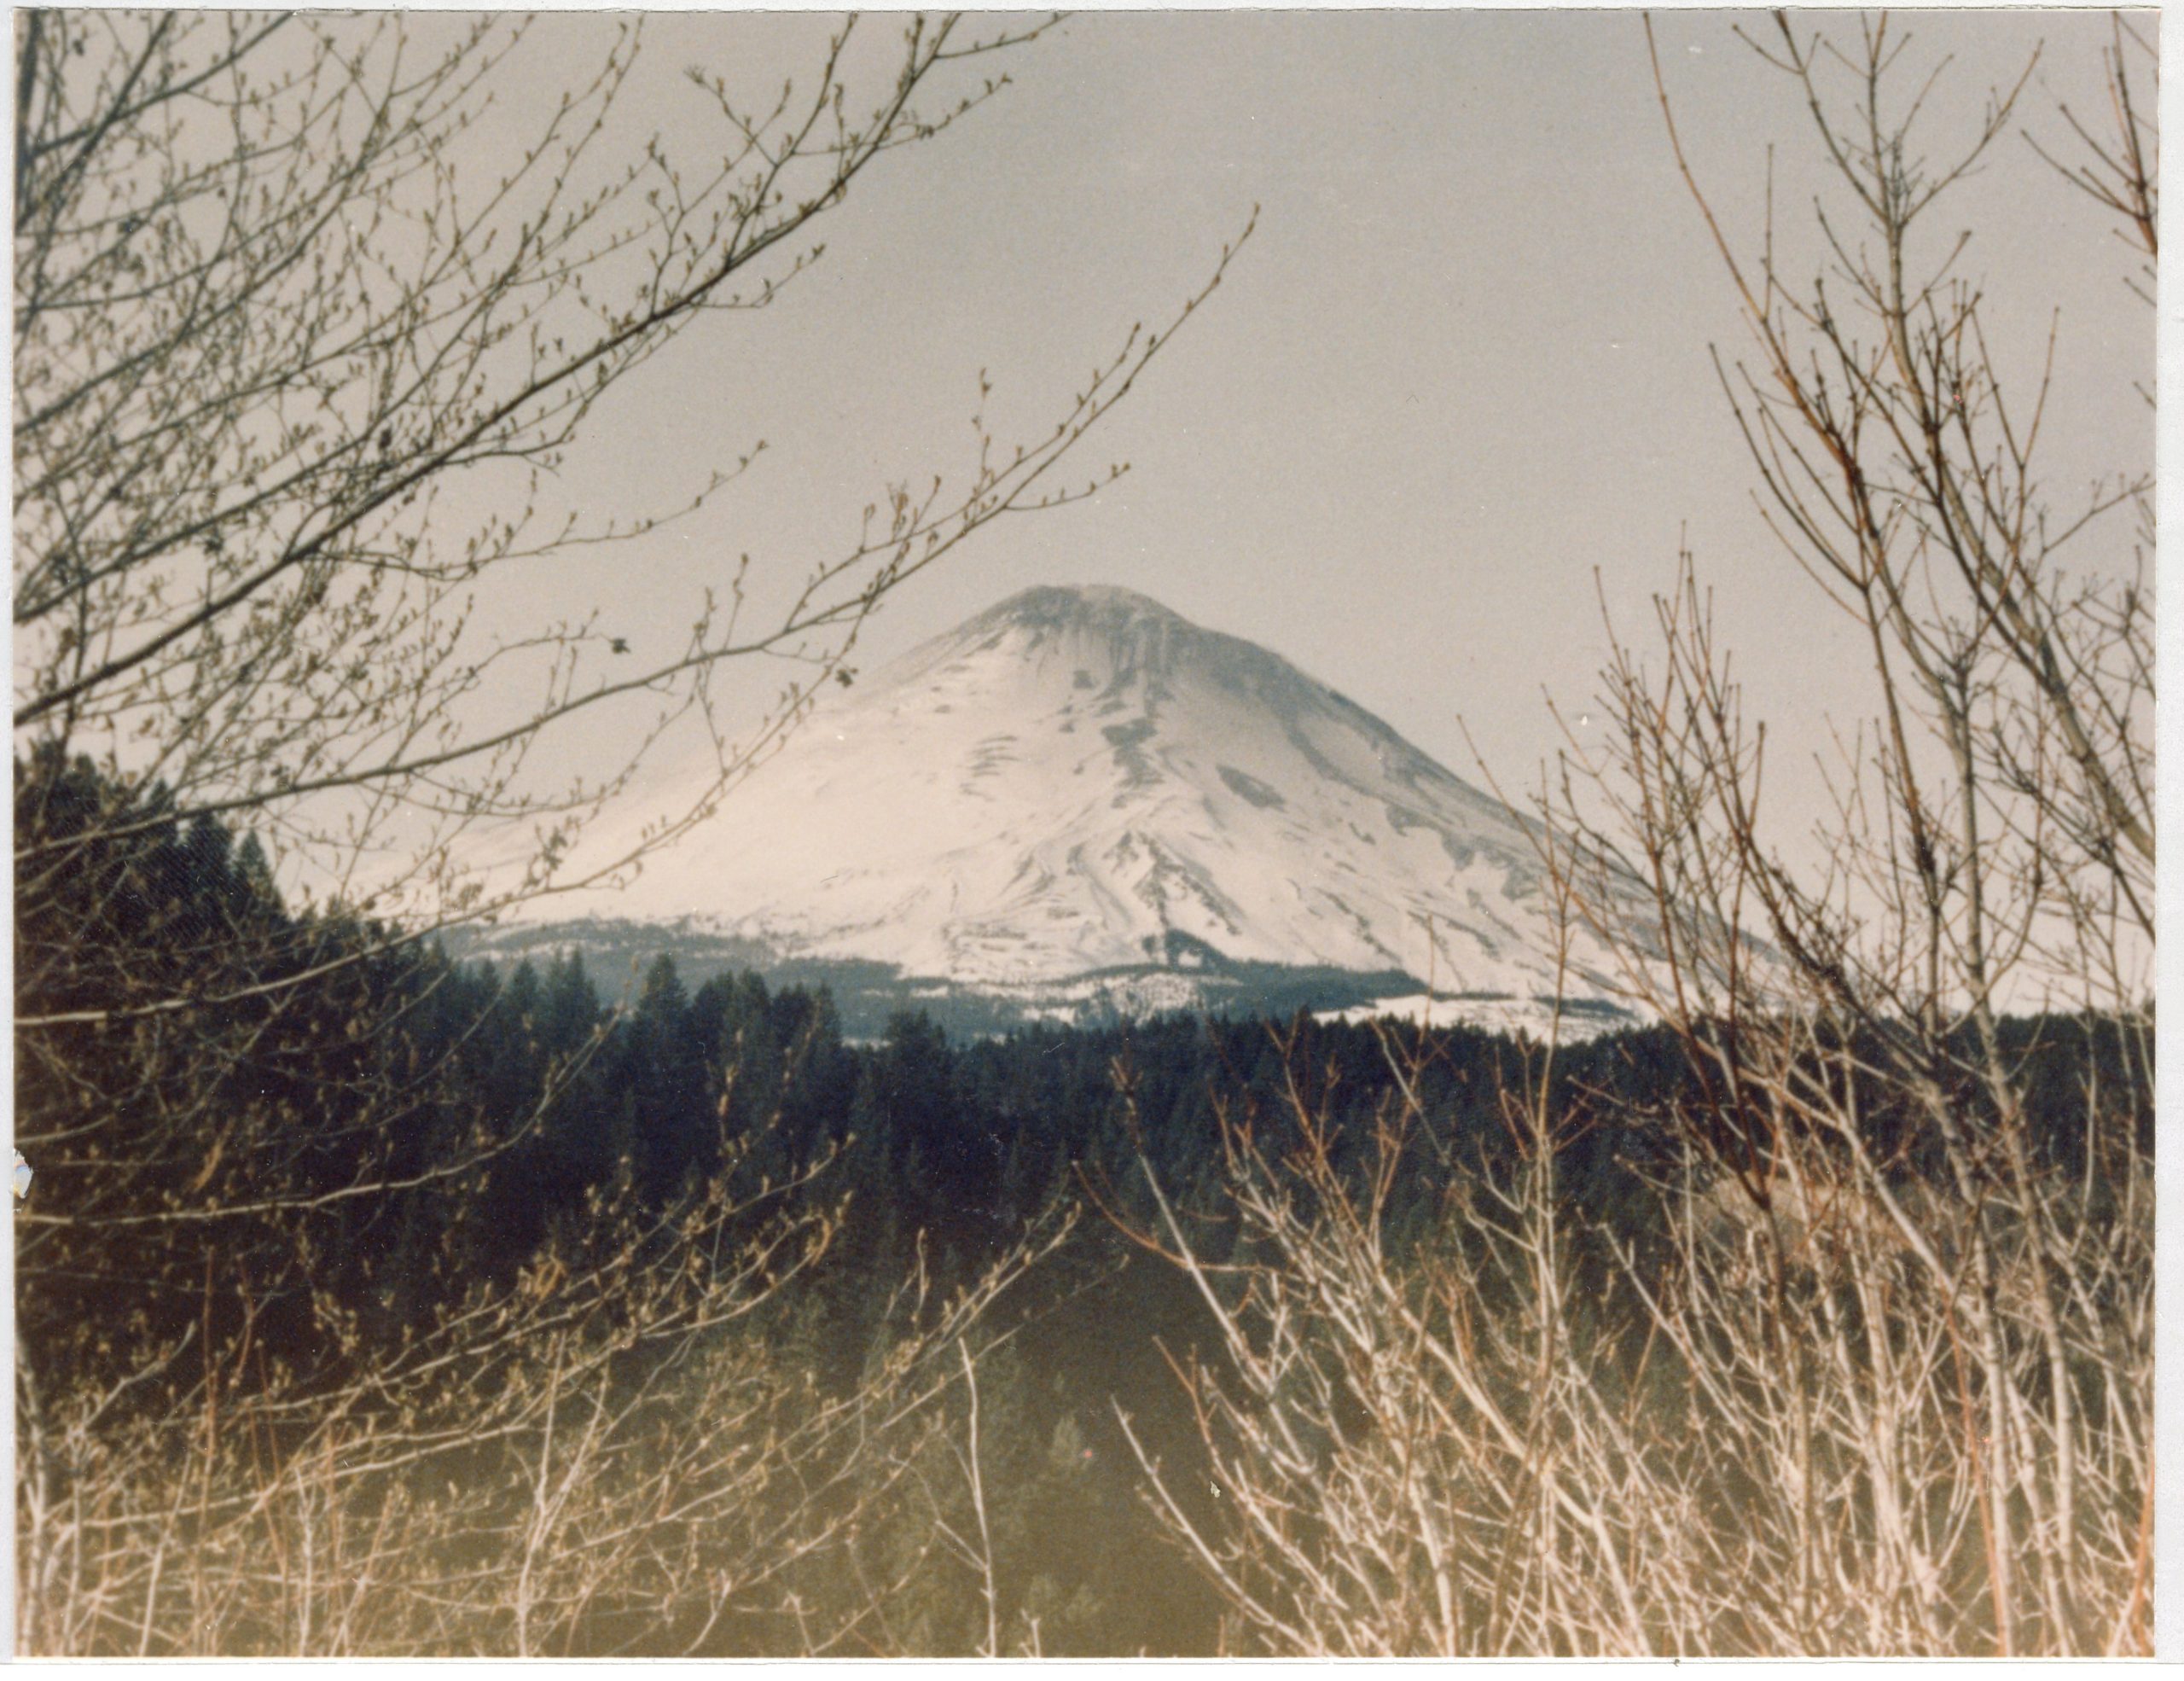 An artistic winter photo of Mount St. Helens when she was a perfect, snow-covered cone, framed by bare branches